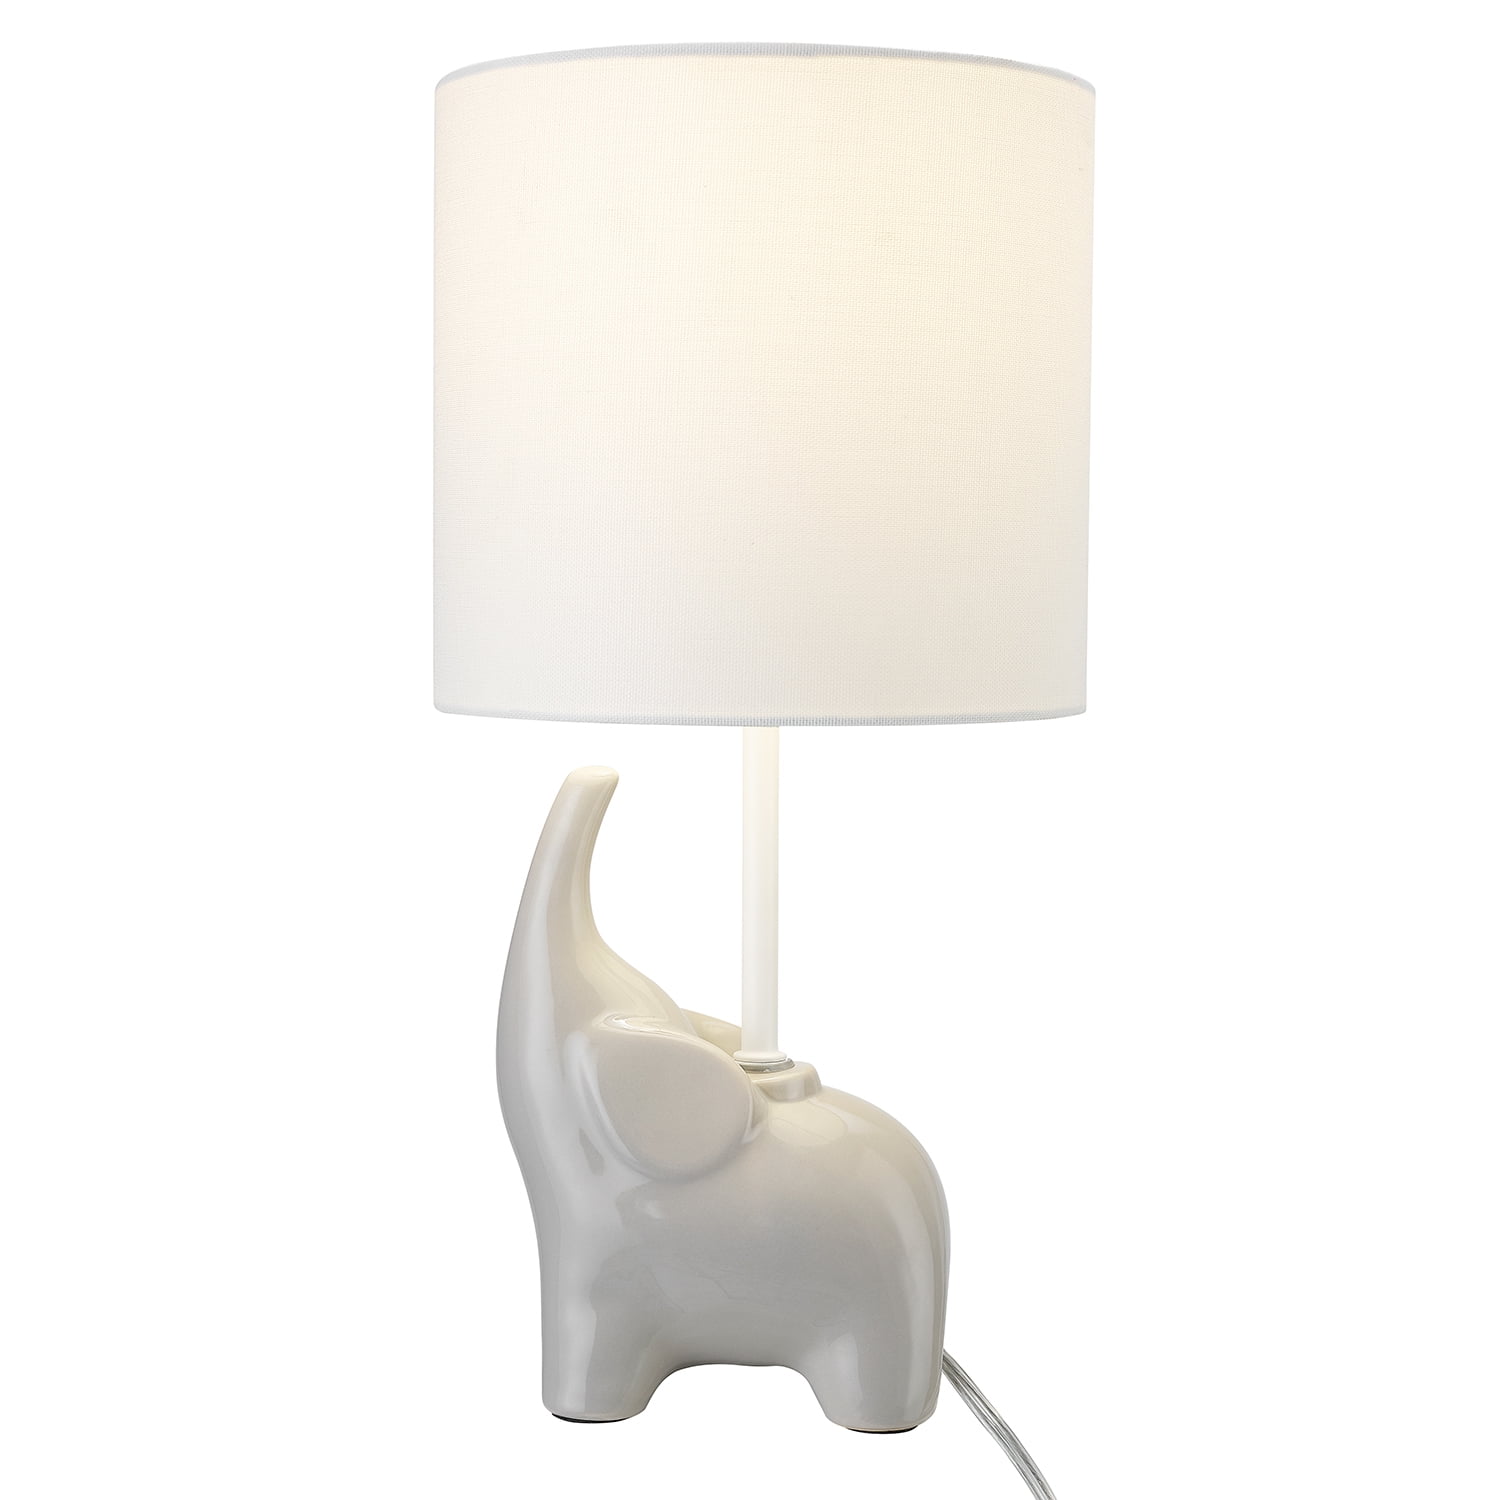 Elephants on Expedition Sculptural Table Lamp w/Decorative Shade 